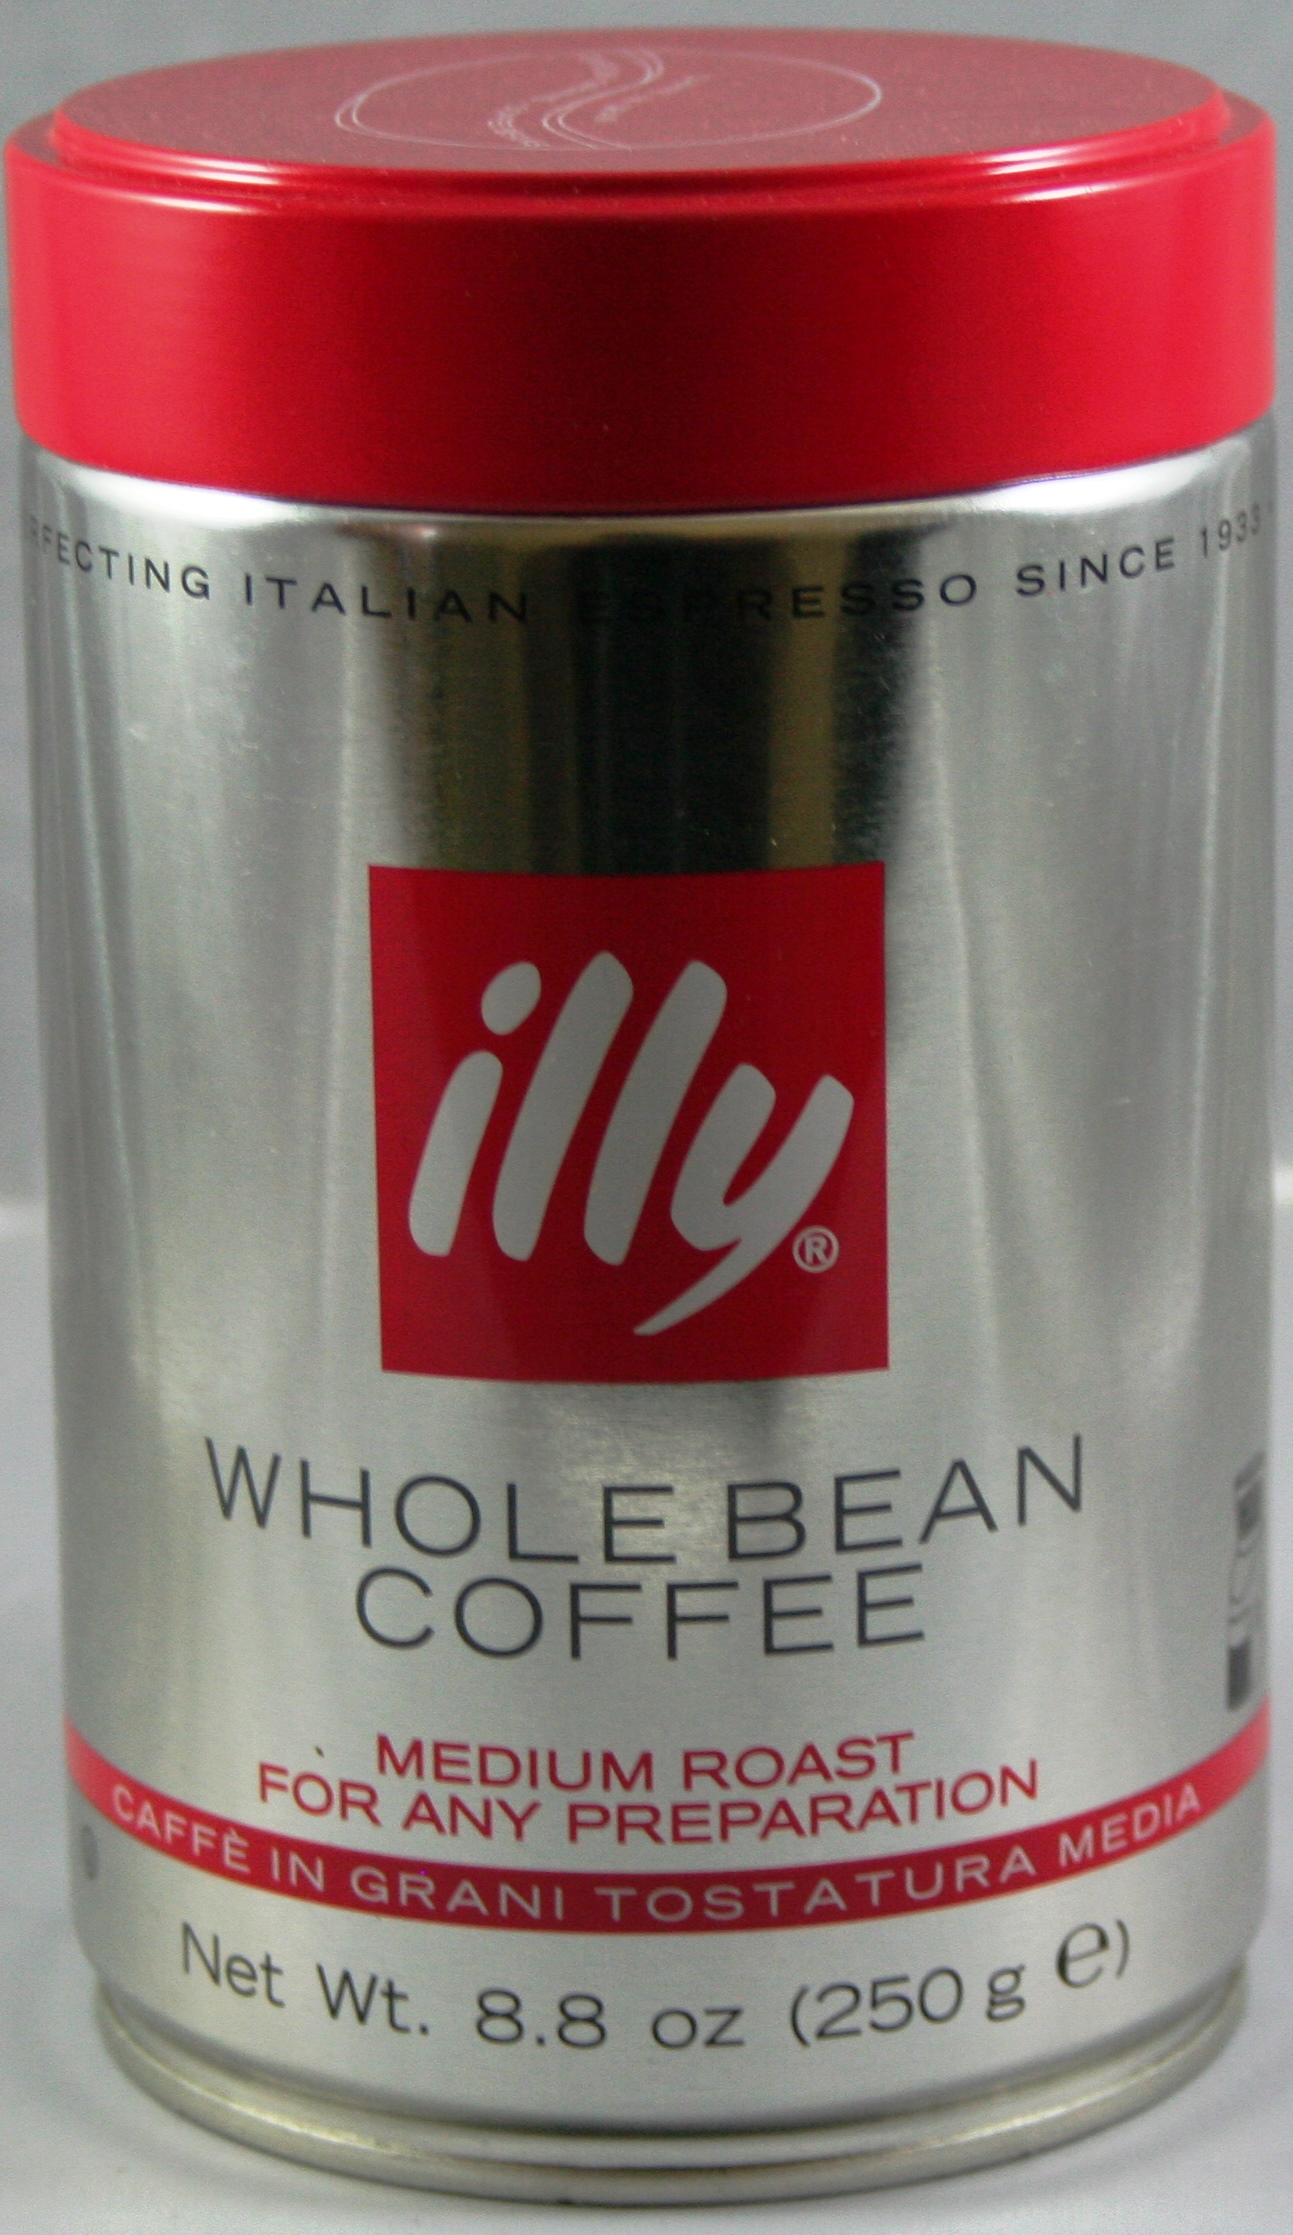 illy Espresso Whole Beans